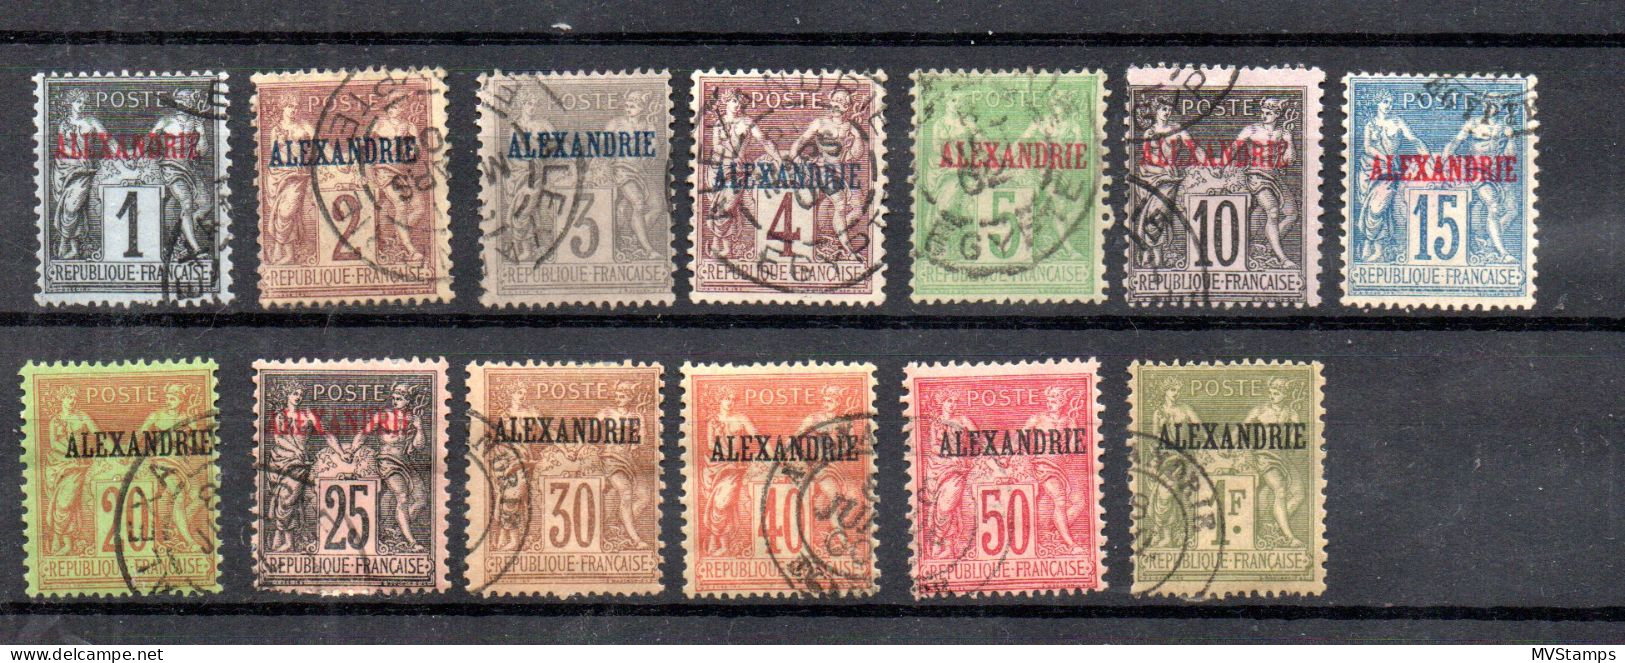 France Post In Alexandria 1899/1900 Old Definitive Sage Stamps (Michel 1/13) Used - Used Stamps